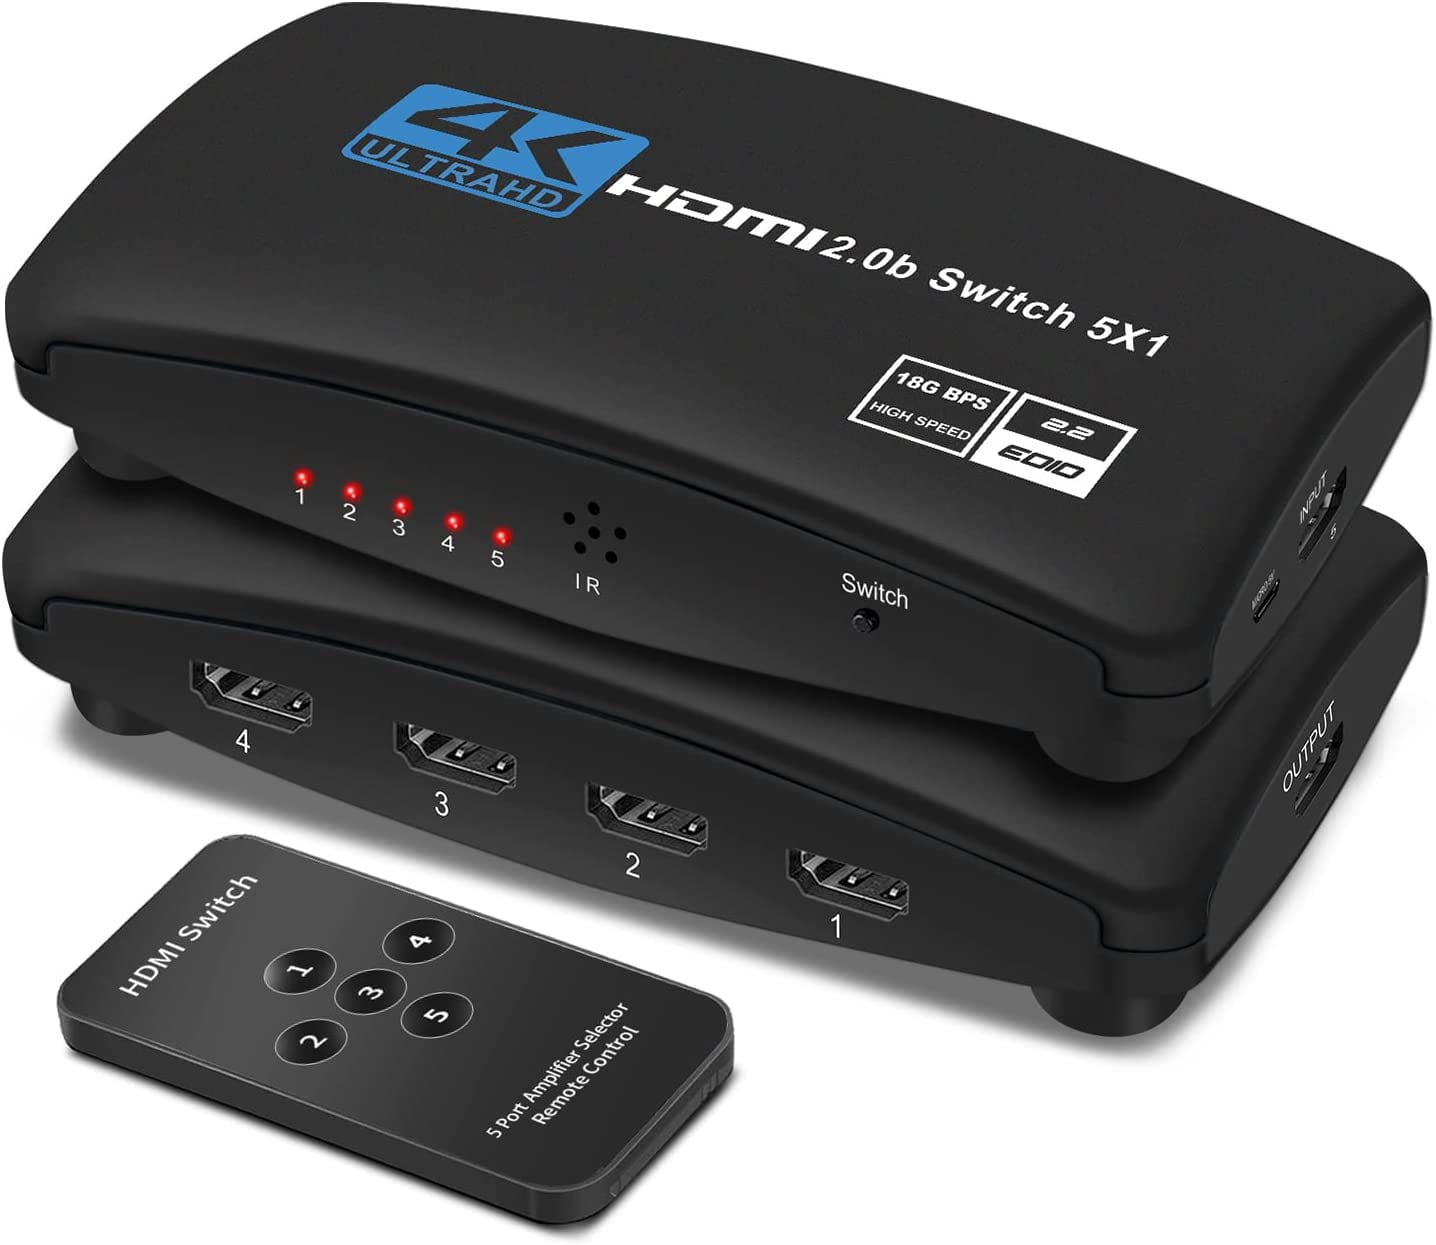 HDMI Switch 5x1 with 4K Support and Remote - Adds 5 HDMI Ports to TV  (400043) - Best Deal in Town Las Vegas